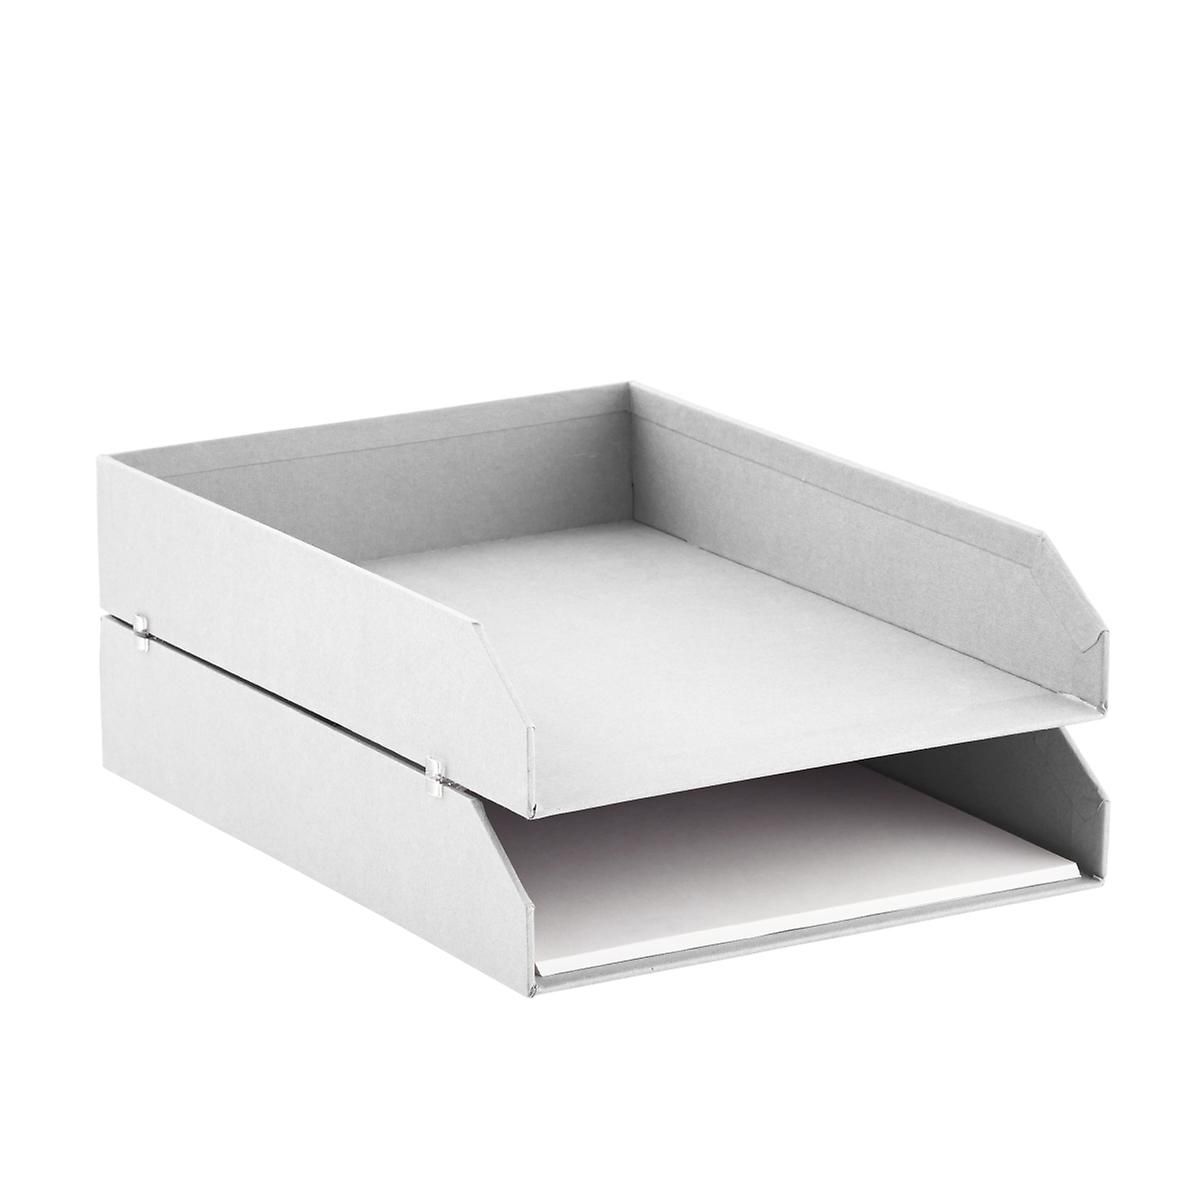 Bigso Light Grey Stockholm Stackable Letter Trays Set of 2 | The Container Store